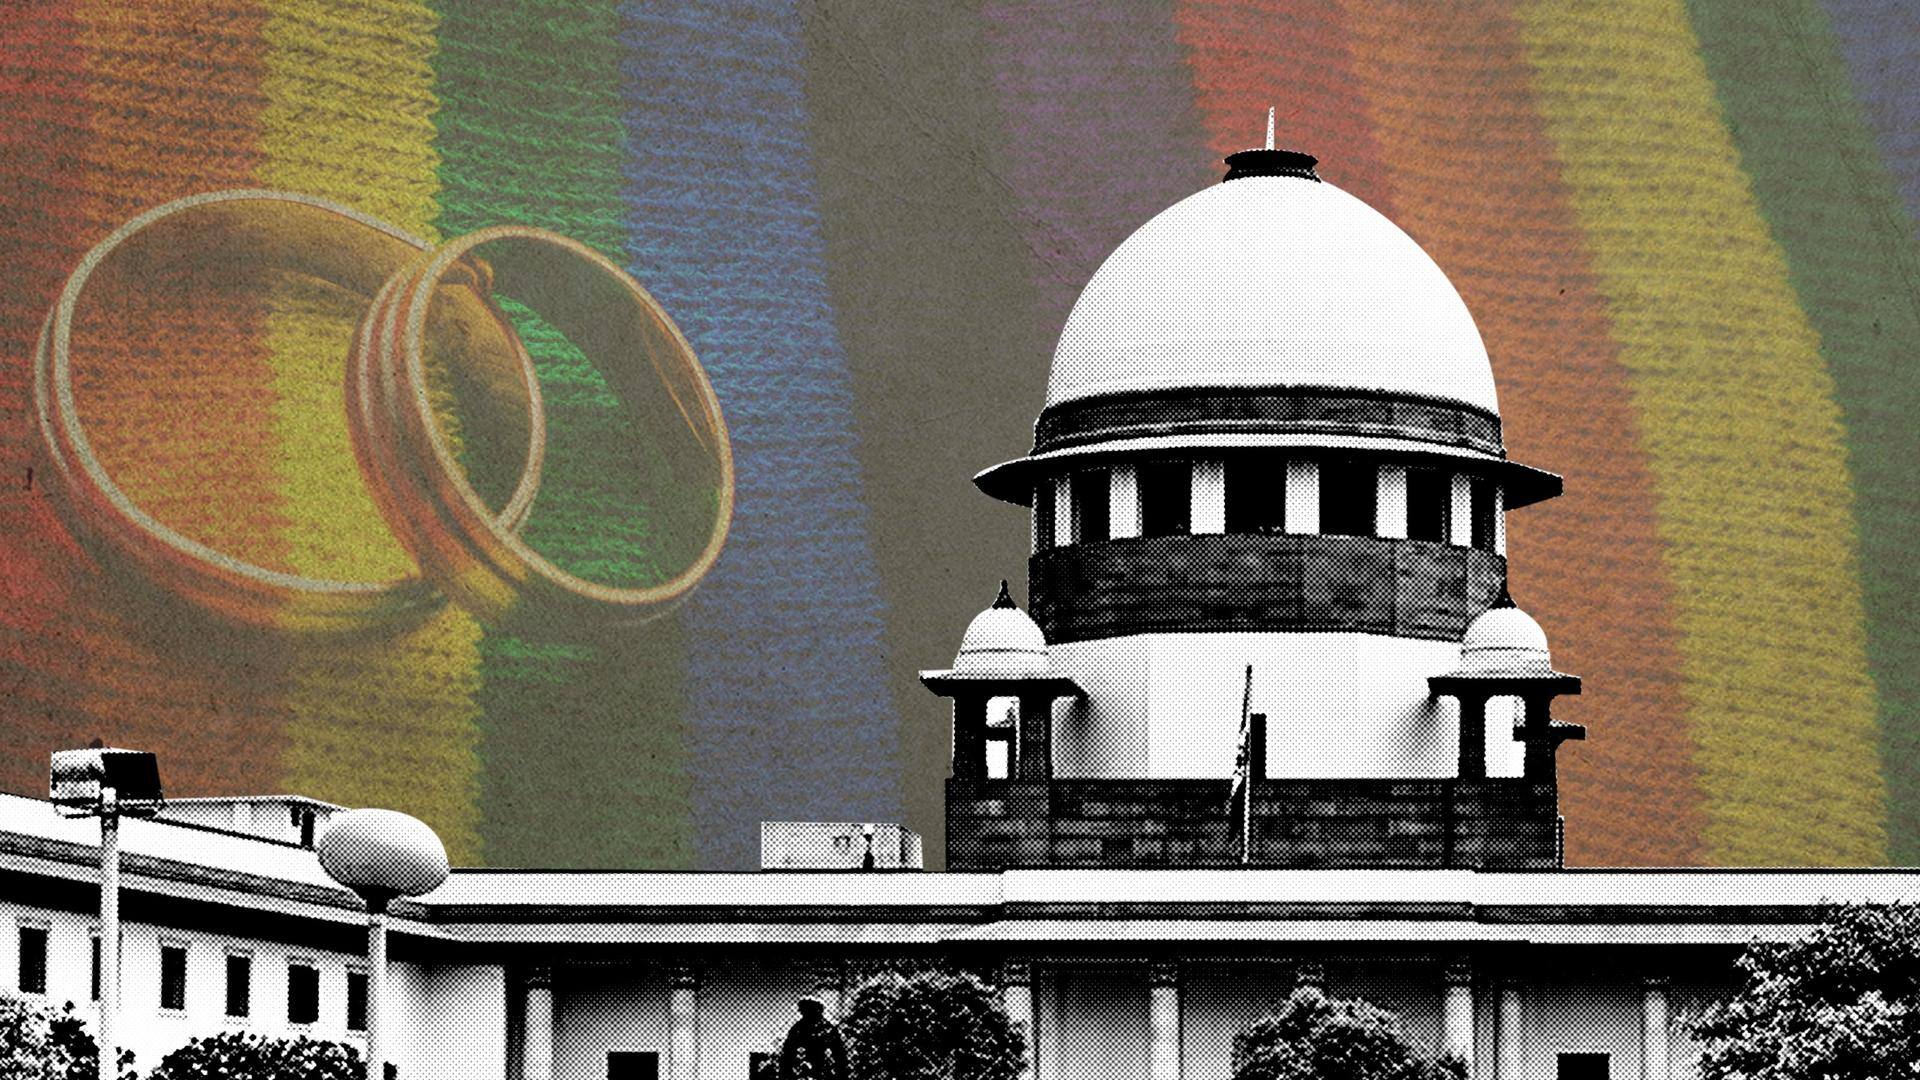 No absolute concept of man, woman: SC on same-sex marriage